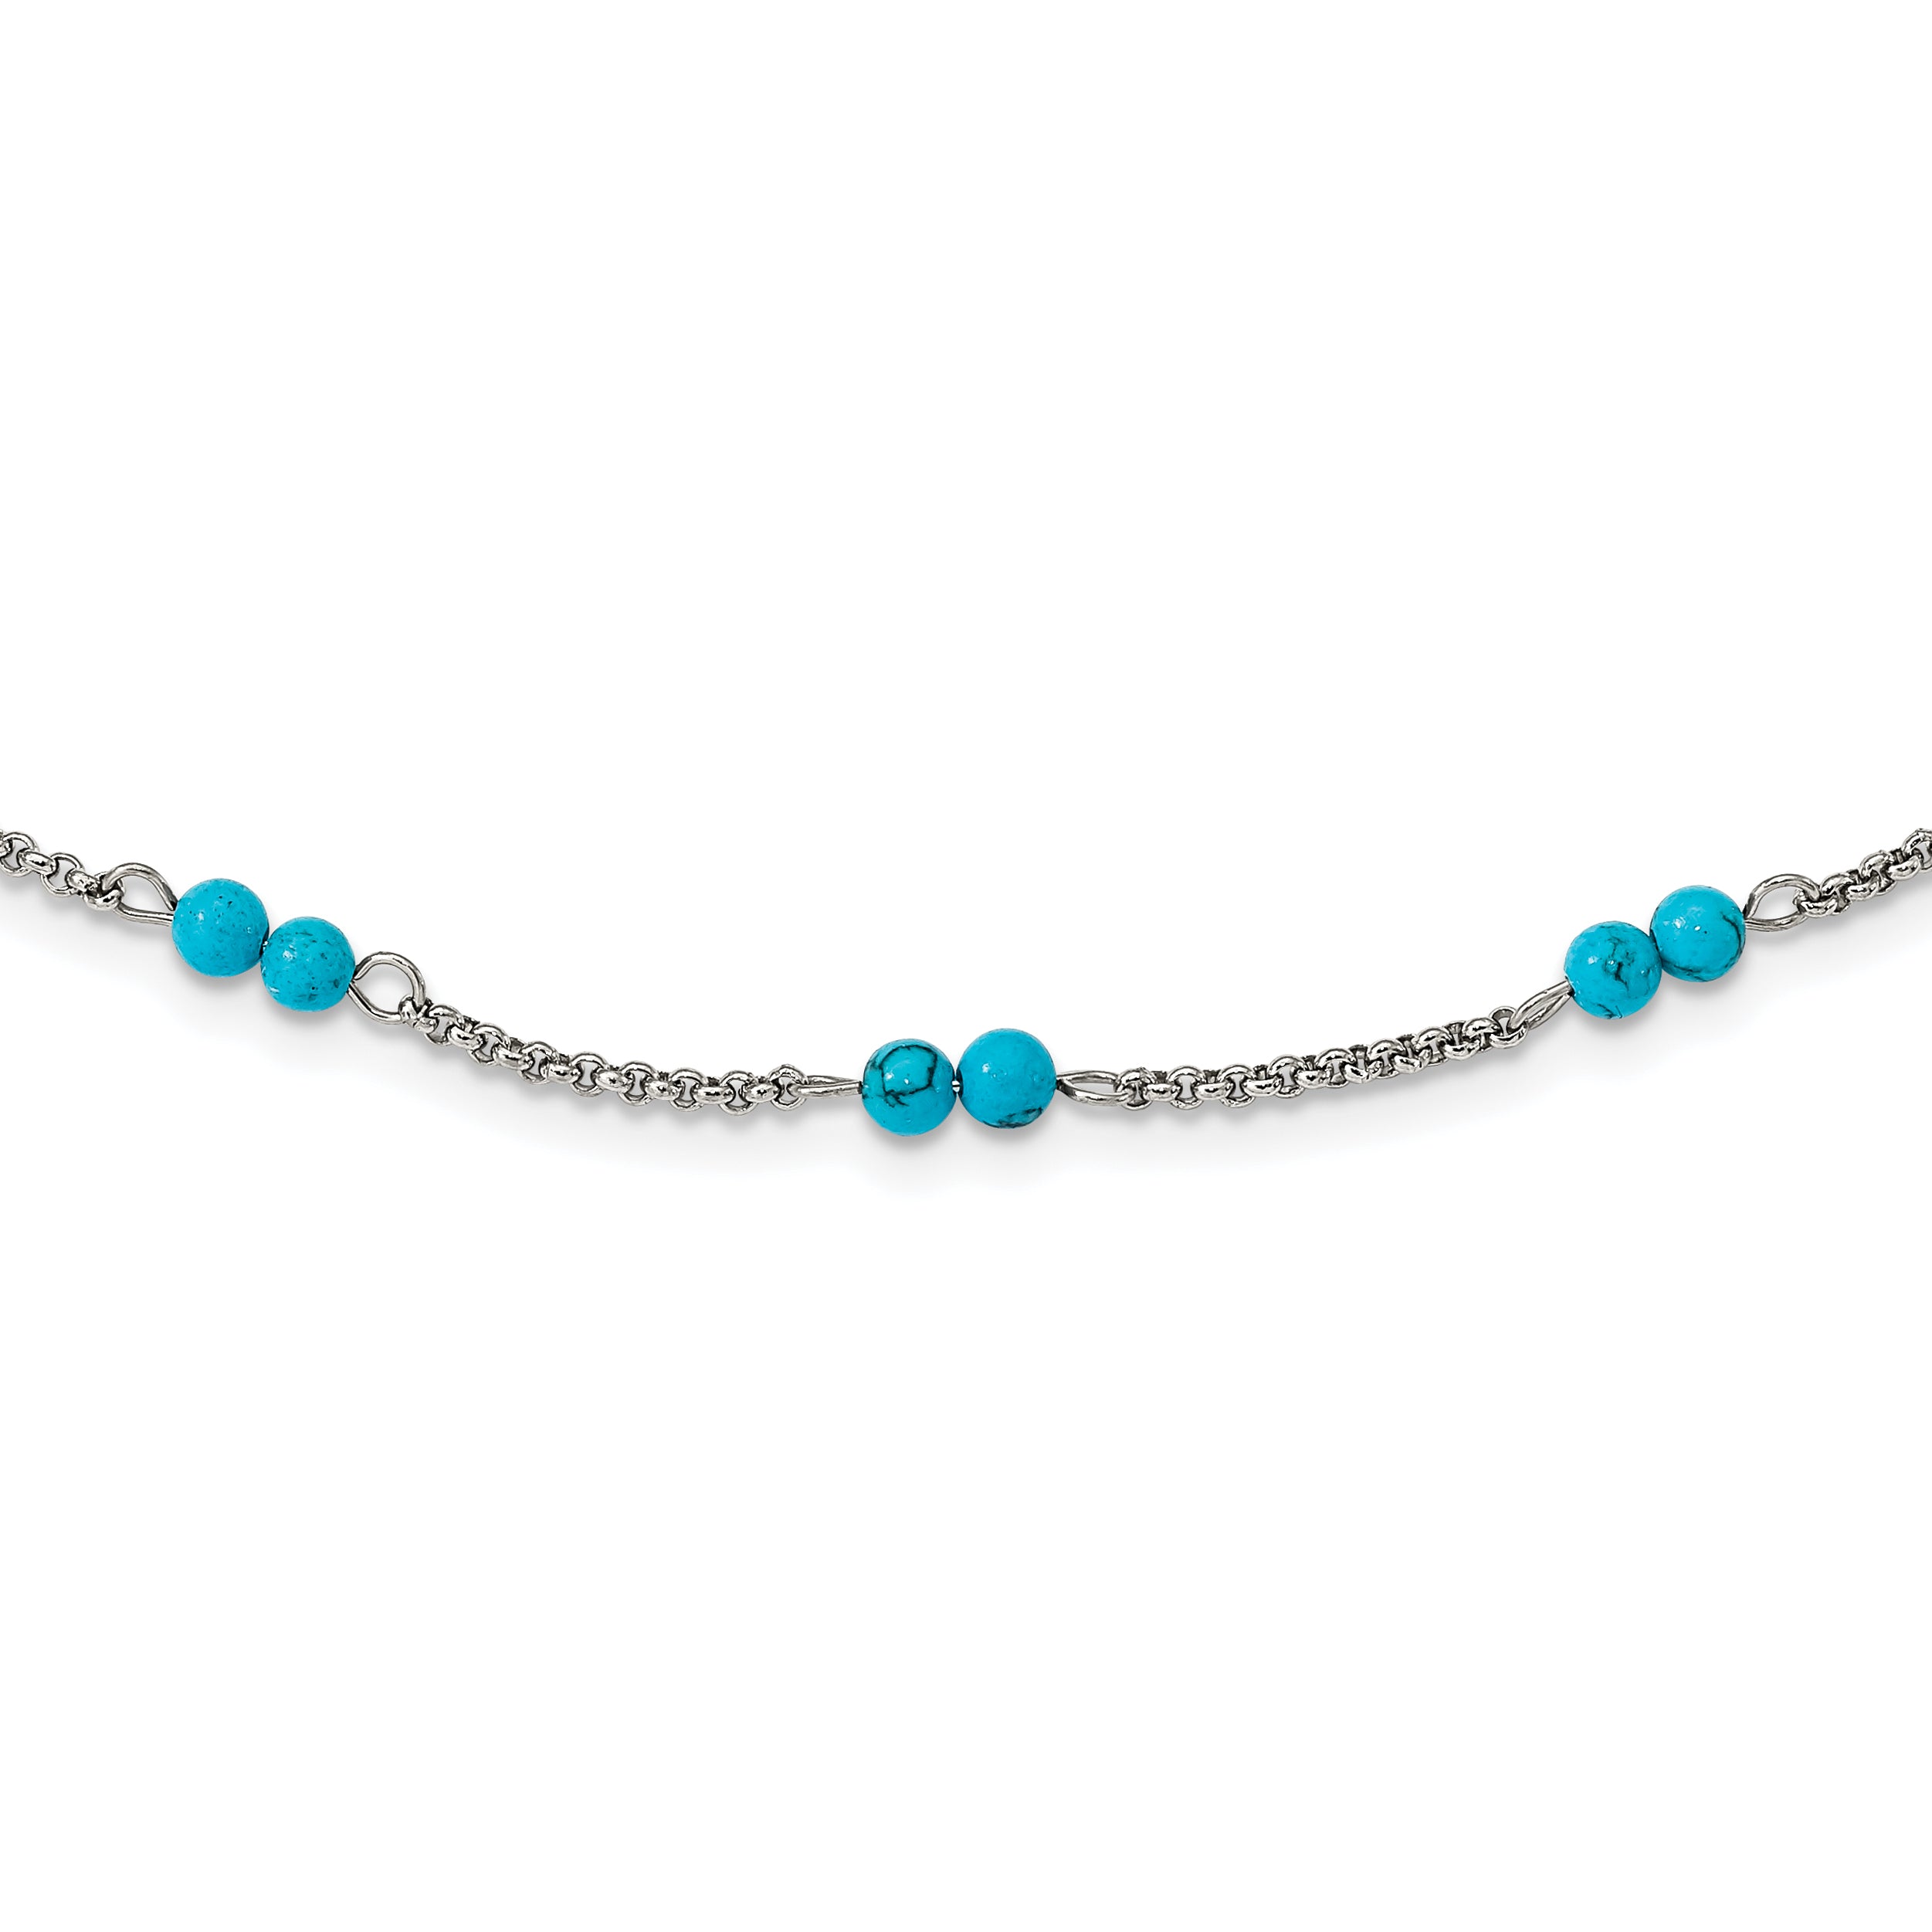 Chisel Stainless Steel Polished Reconstructed Turquoise Beaded 33.5 inch with 1.75 inch Extension Necklace